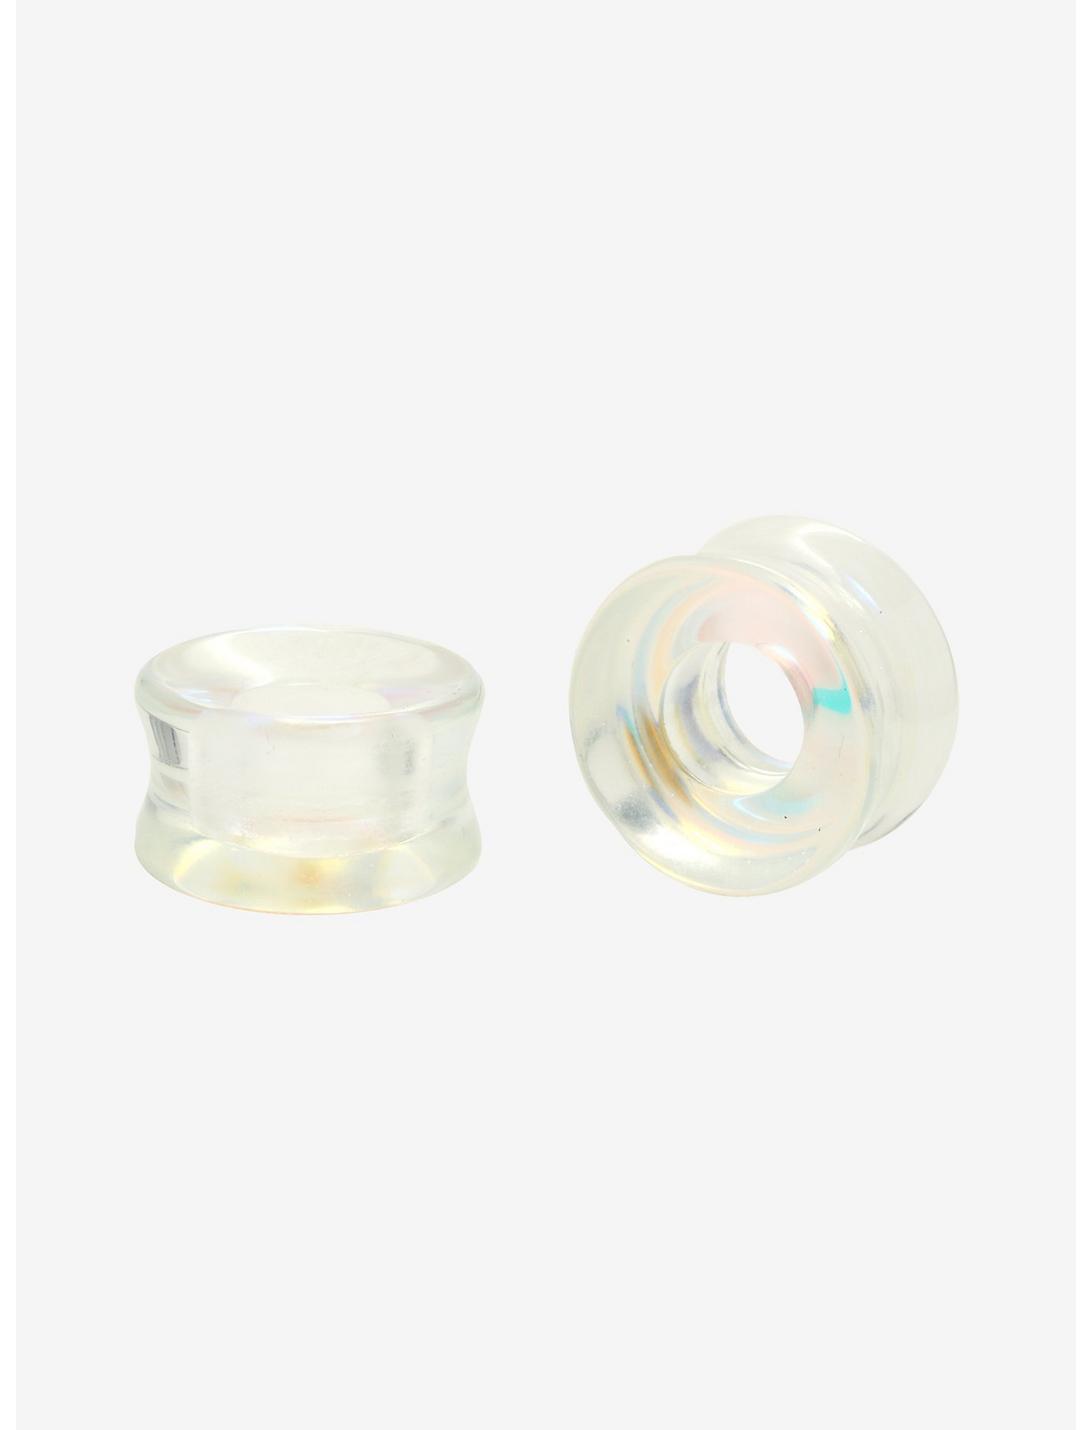 Glass Iridescent Tunnel Plug 2 Pack, CLEAR, hi-res